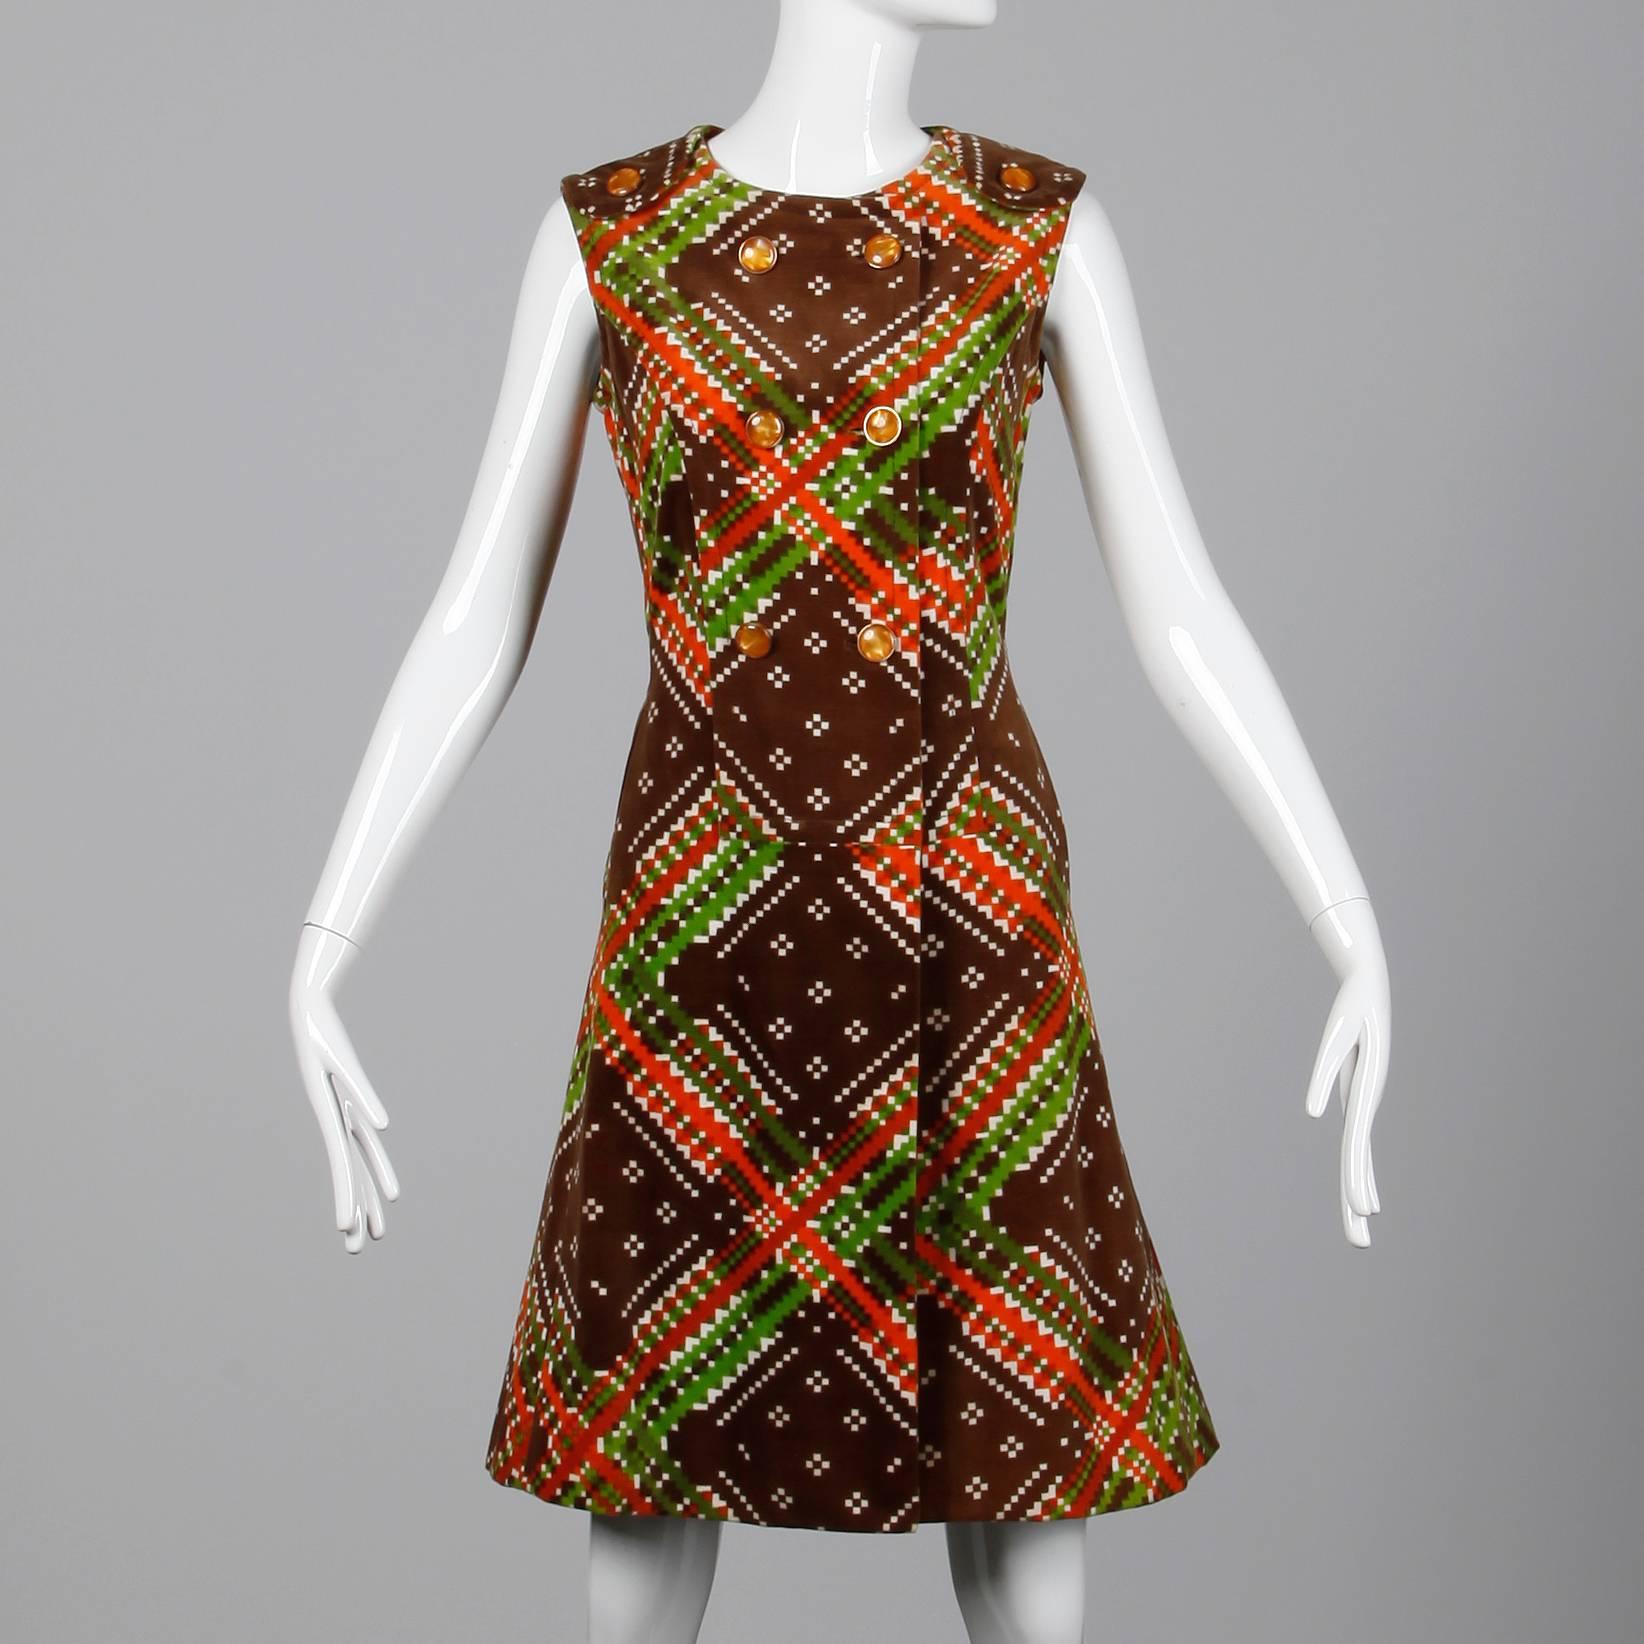 Darling vintage white, brown, orange and green geometric printed dress attributed to Malcolm Starr. We have the matching culotte/ blouse set with the Malcolm Starr label in it, but this dress only has the Sara Fredericks store label in tact. Fully